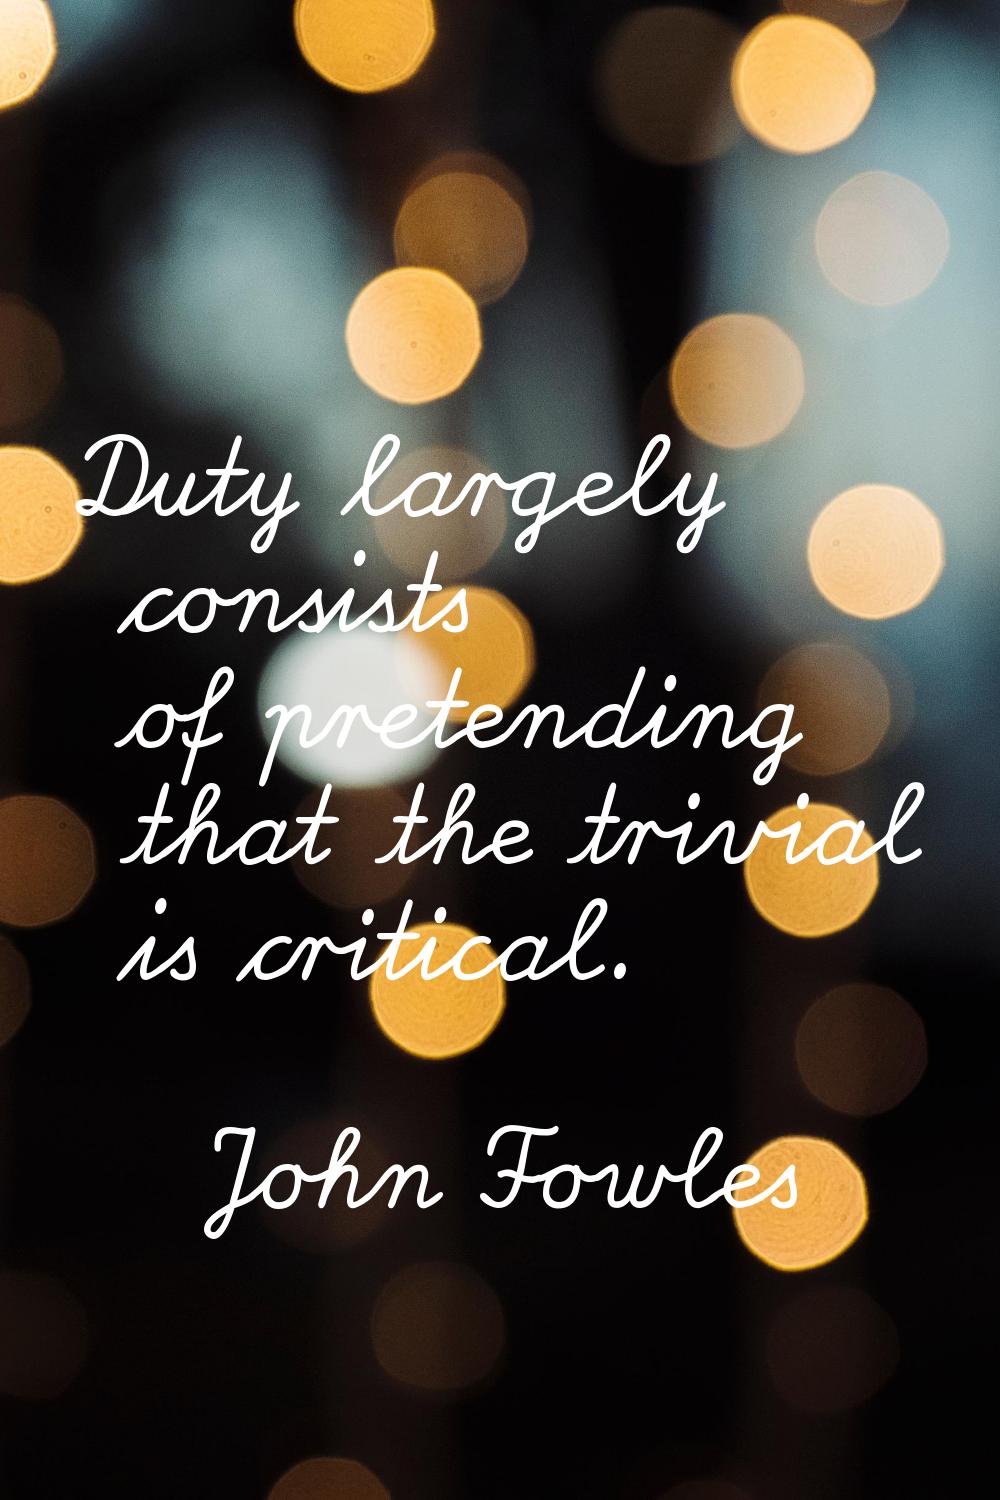 Duty largely consists of pretending that the trivial is critical.